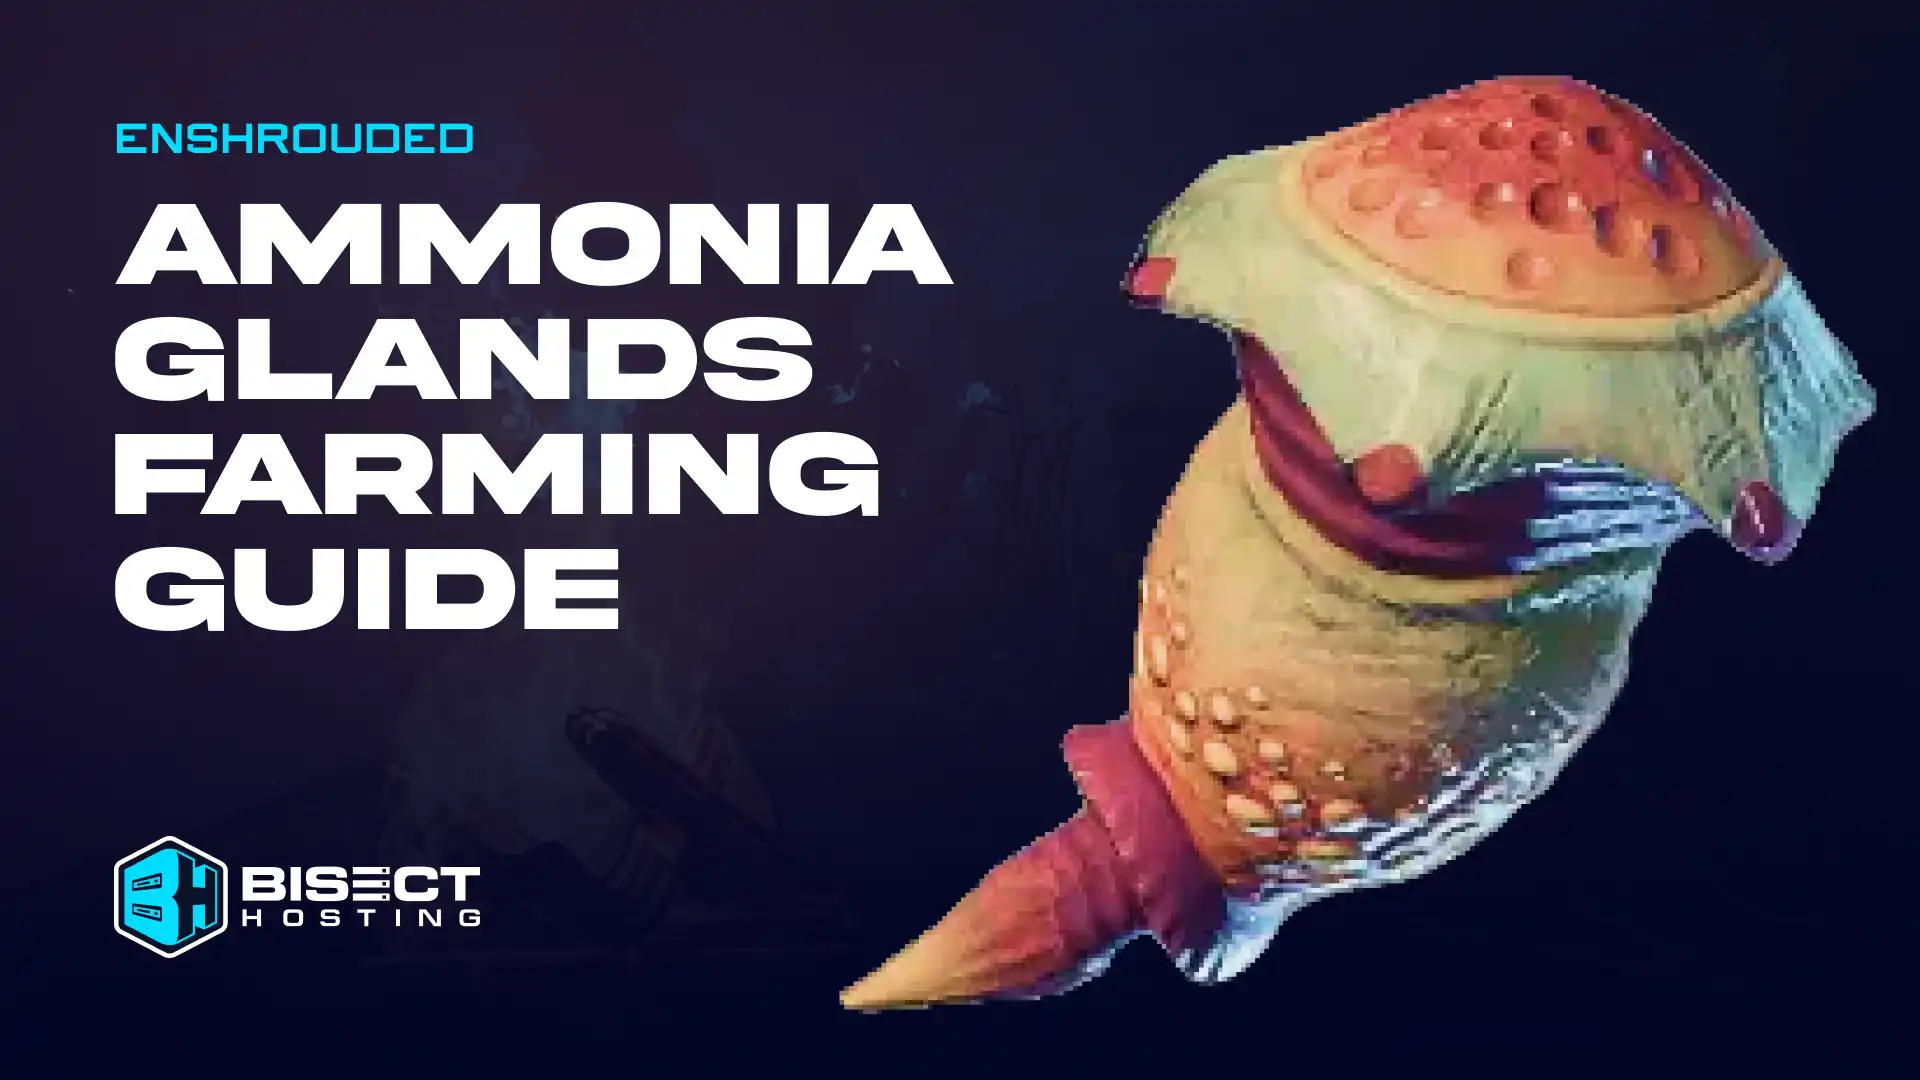 Enshrouded Ammonia Glands Farming Guide: Locations, Uses, & more